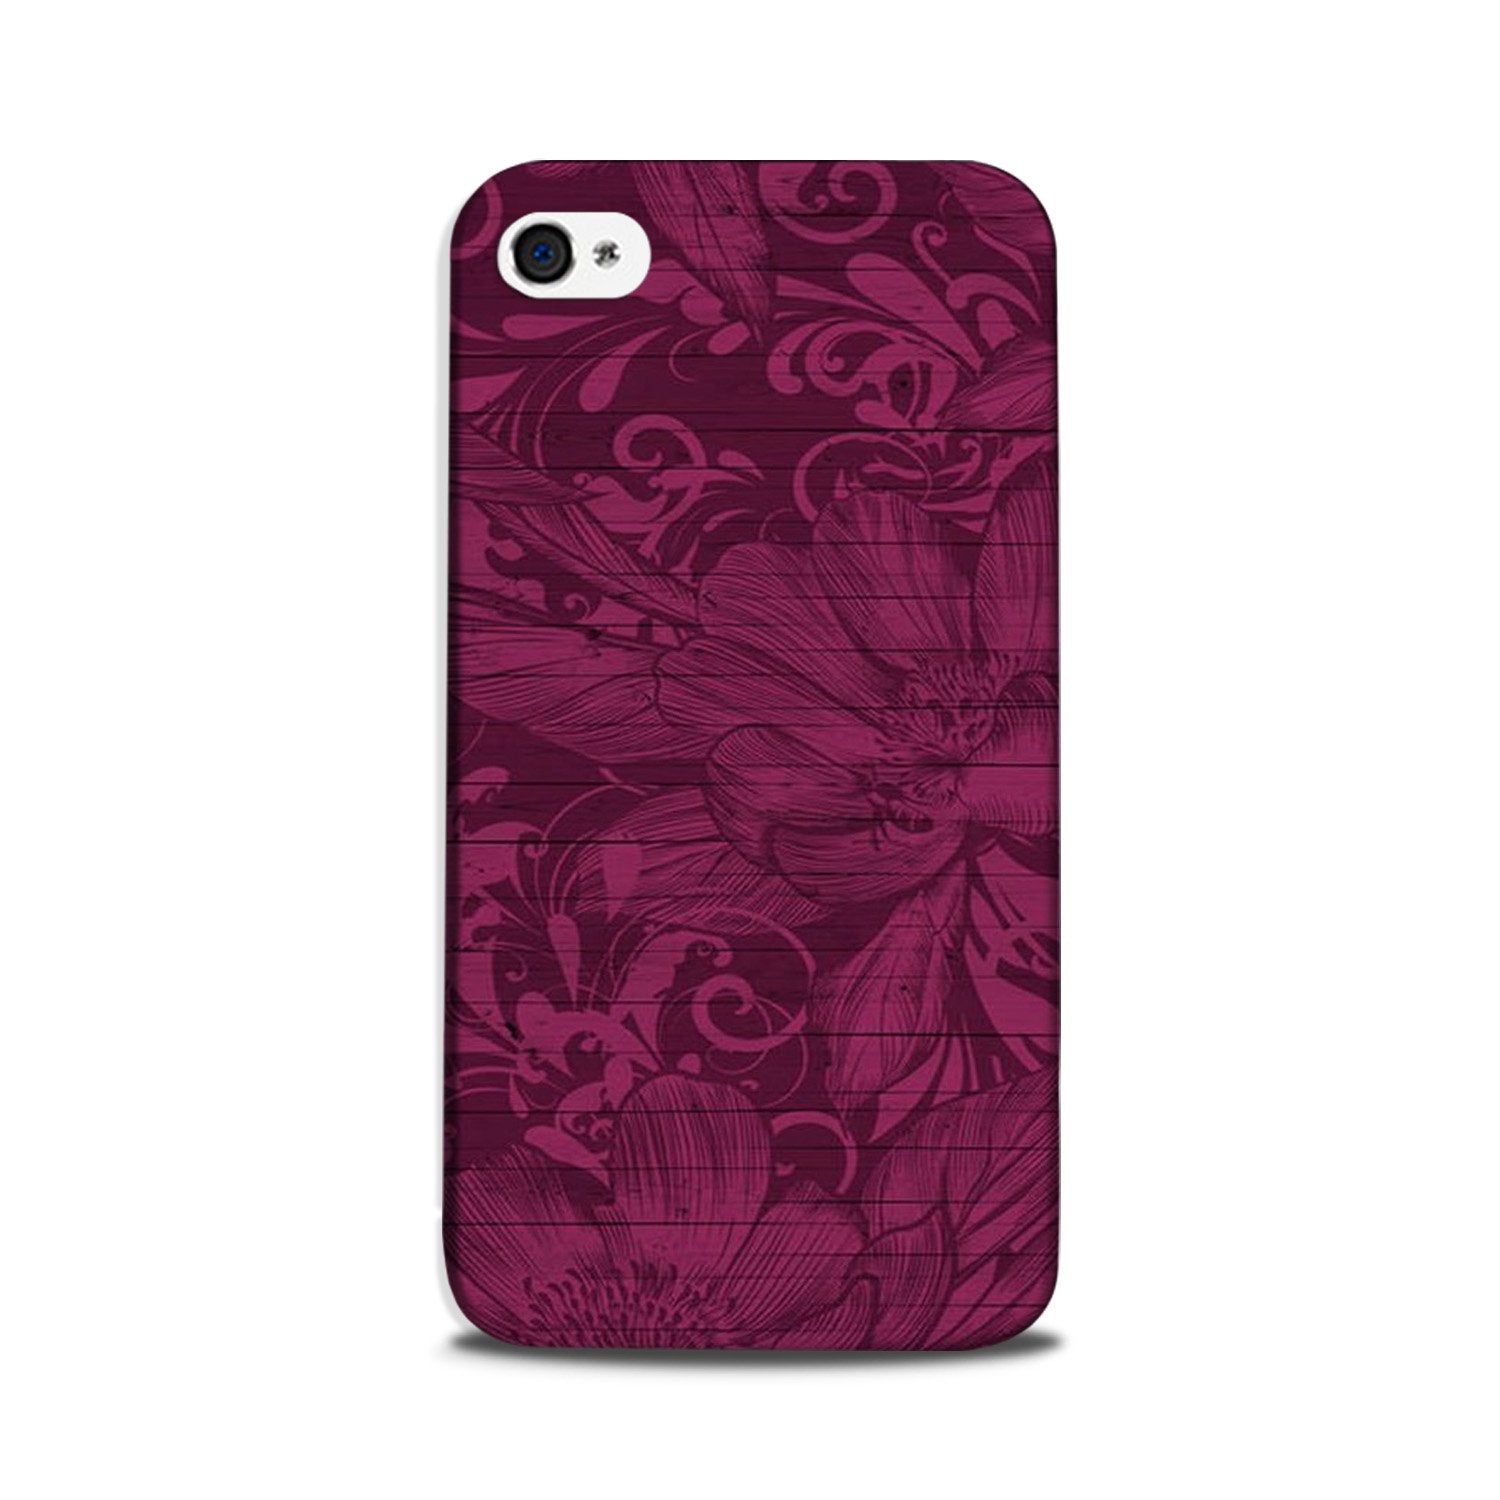 Purple Backround Case for iPhone 5/ 5s